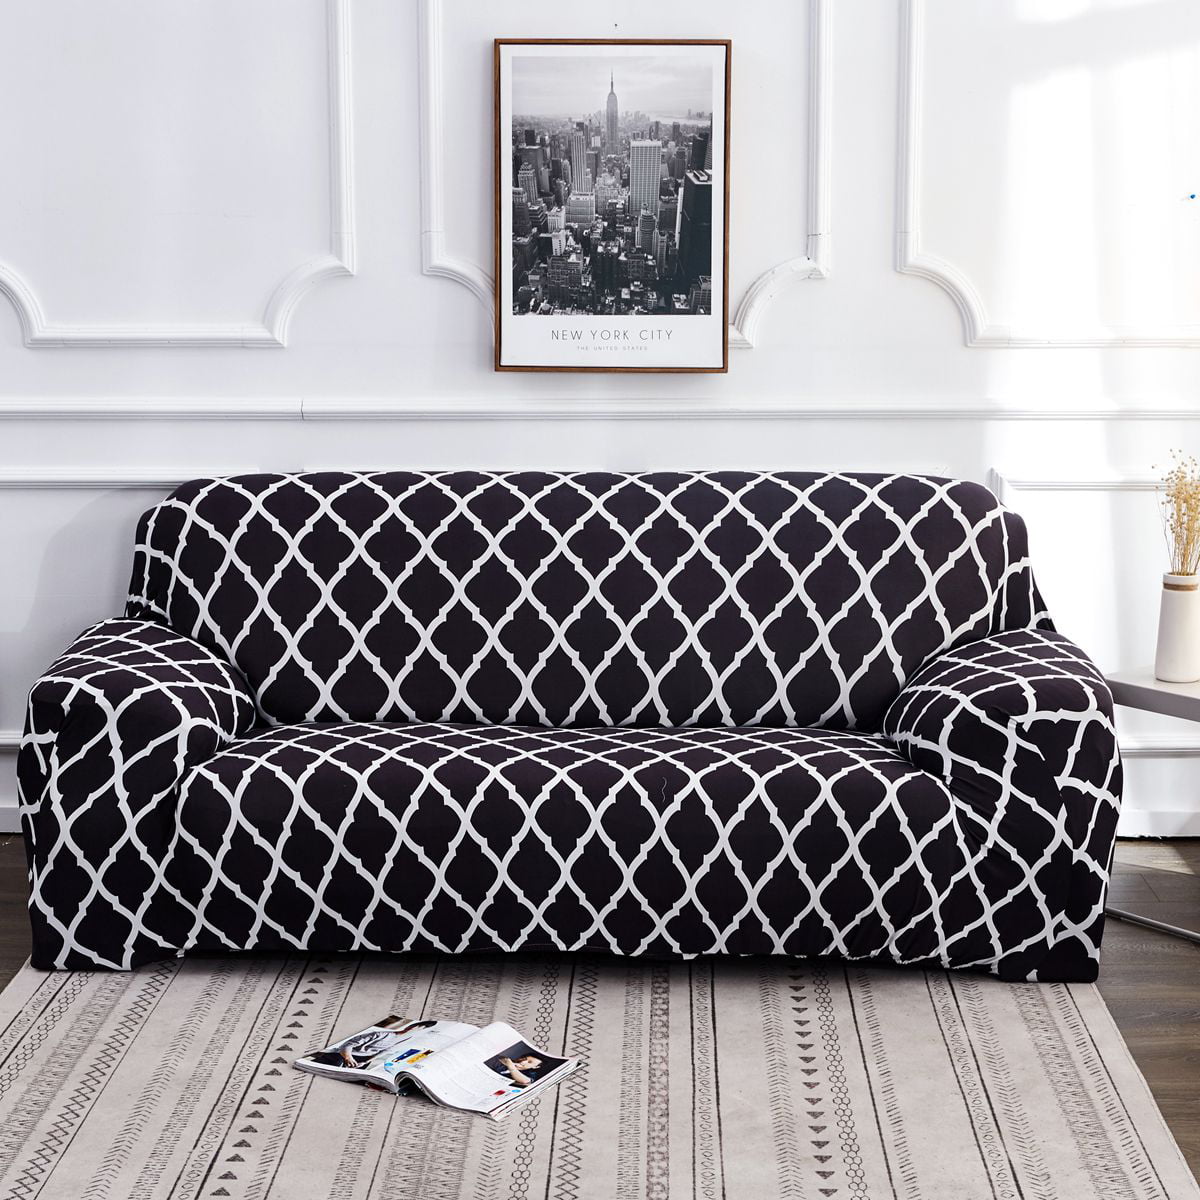 Details about   Elastic Sofa Cover Anti-Wrinkle Slipcover Furniture Protector 1/2/3 Seaters USA 